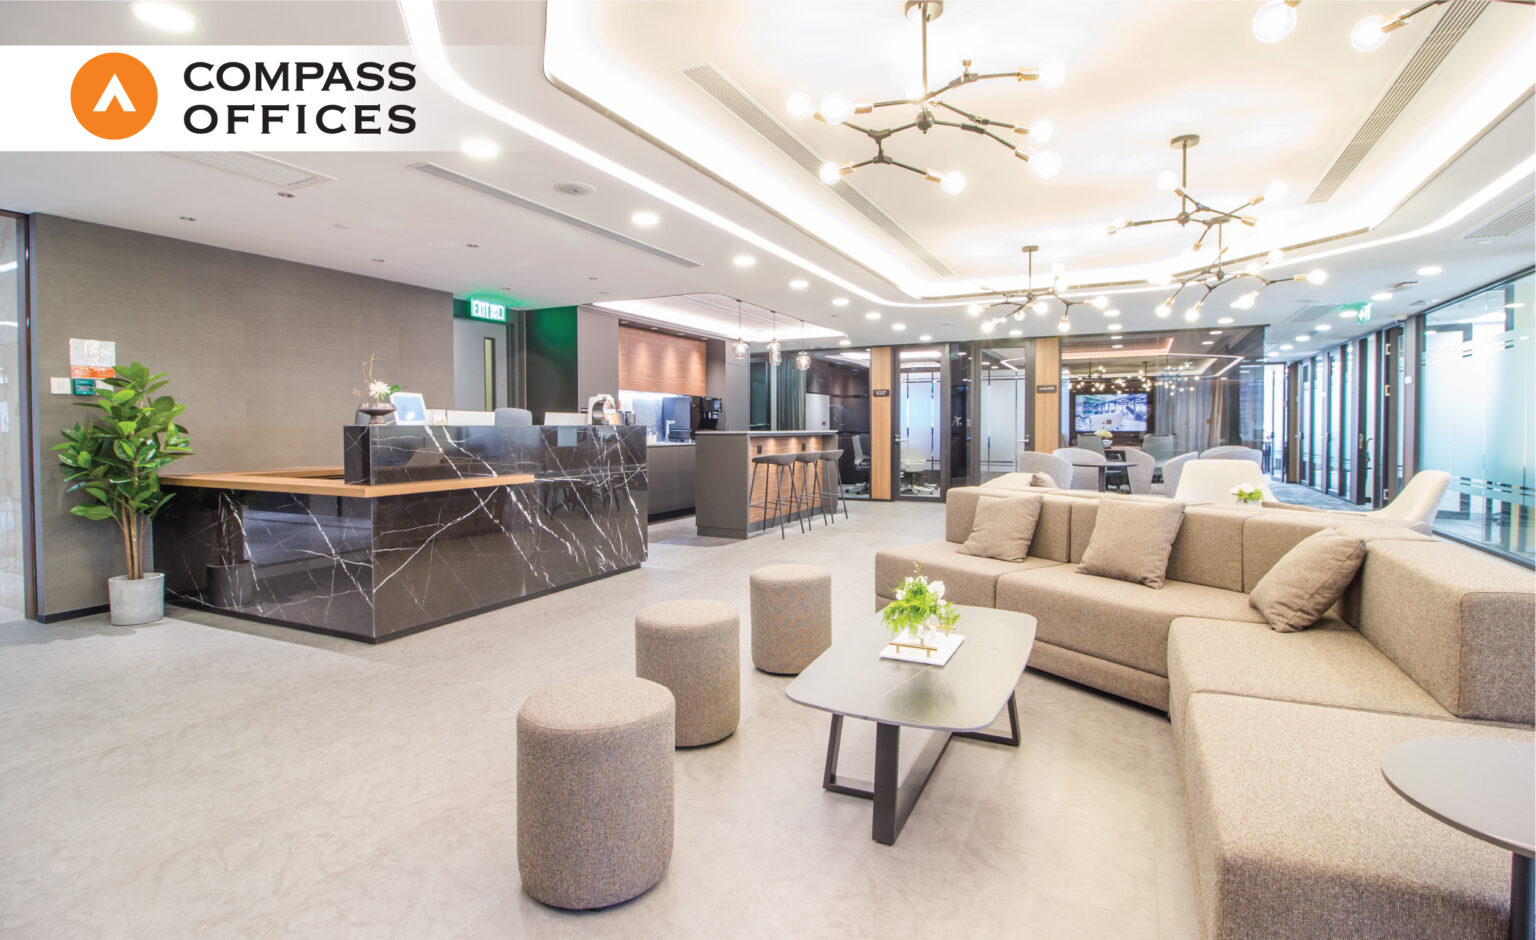 Compass Offices’ flexible workspace at Admiralty Centre Tower 1